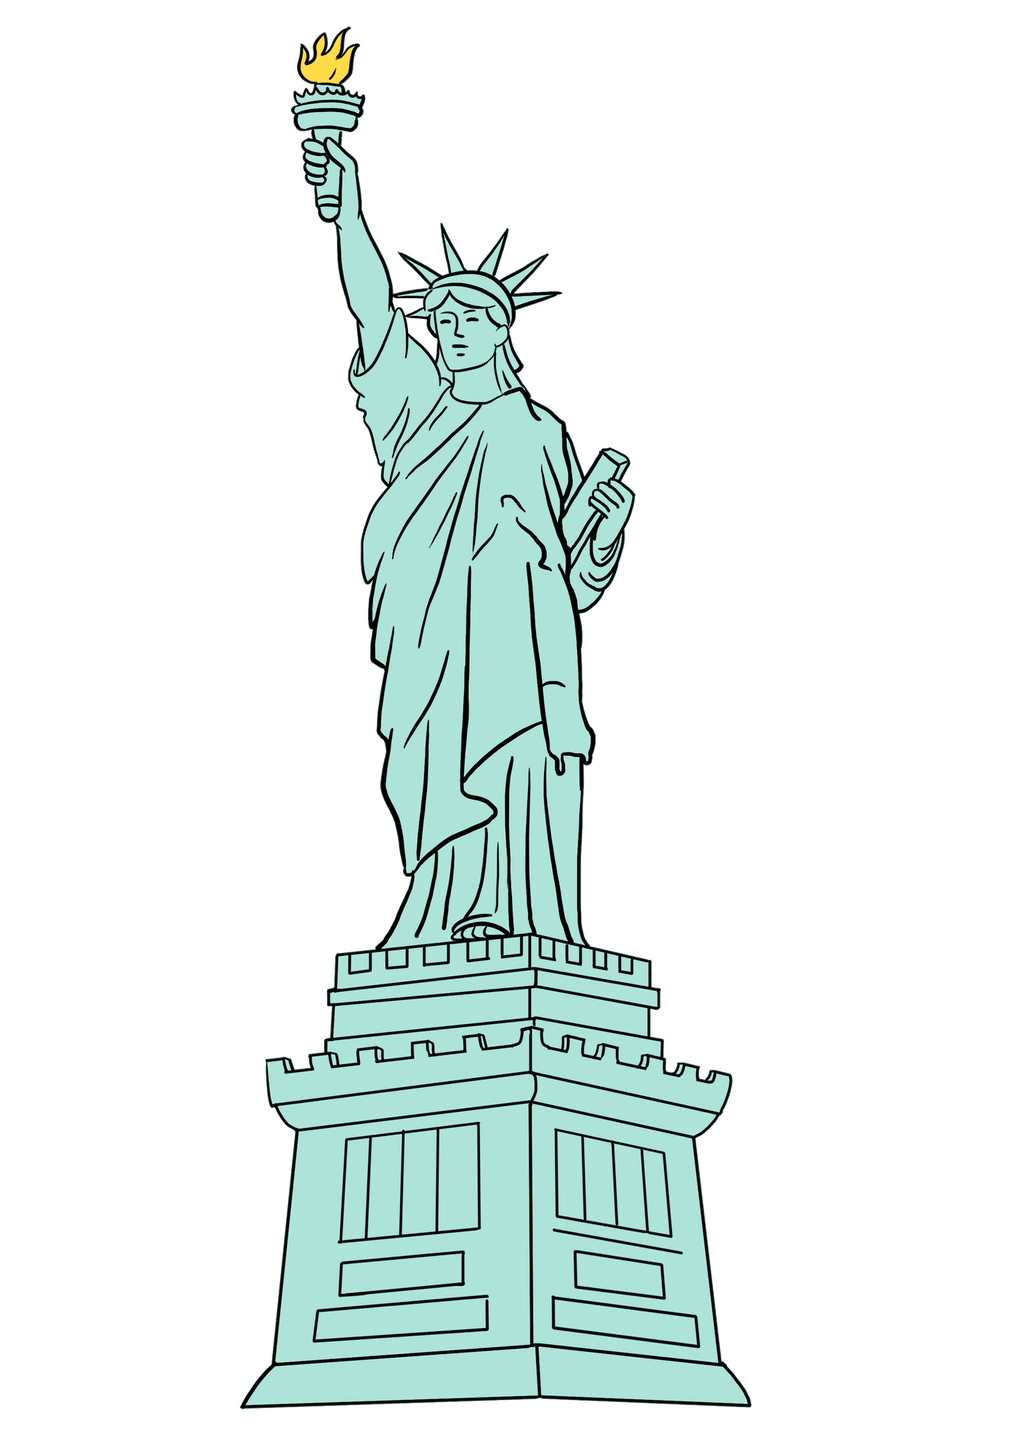 Easy Drawing Guides on Twitter: "Drawing the Statue of Liberty is easy